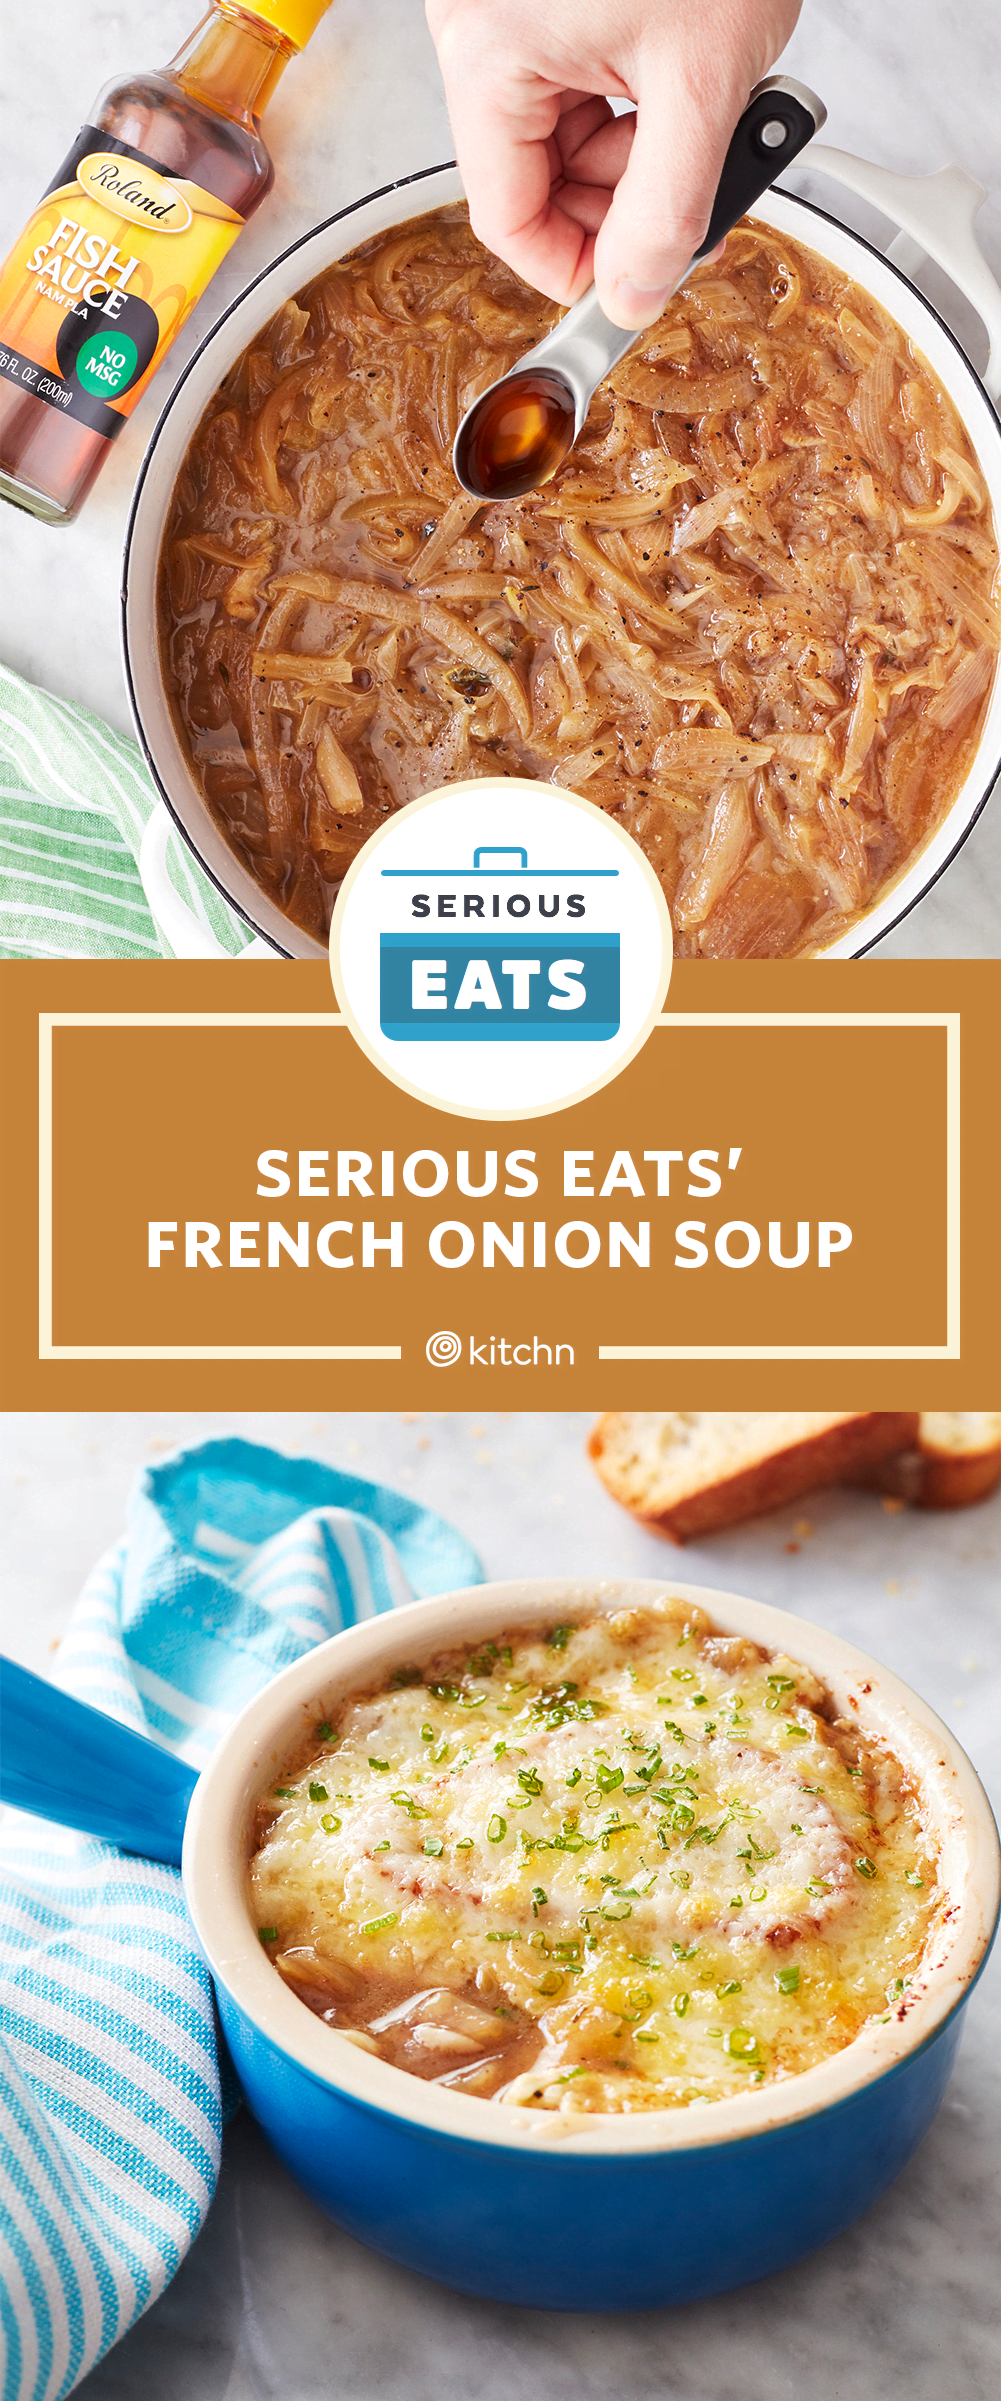 https://cdn.apartmenttherapy.info/image/upload/v1579729572/k/Photo/Series/2020-01-Battle-French-Onion-Soup/FrenchOnion-SERIOUS_EATS.png